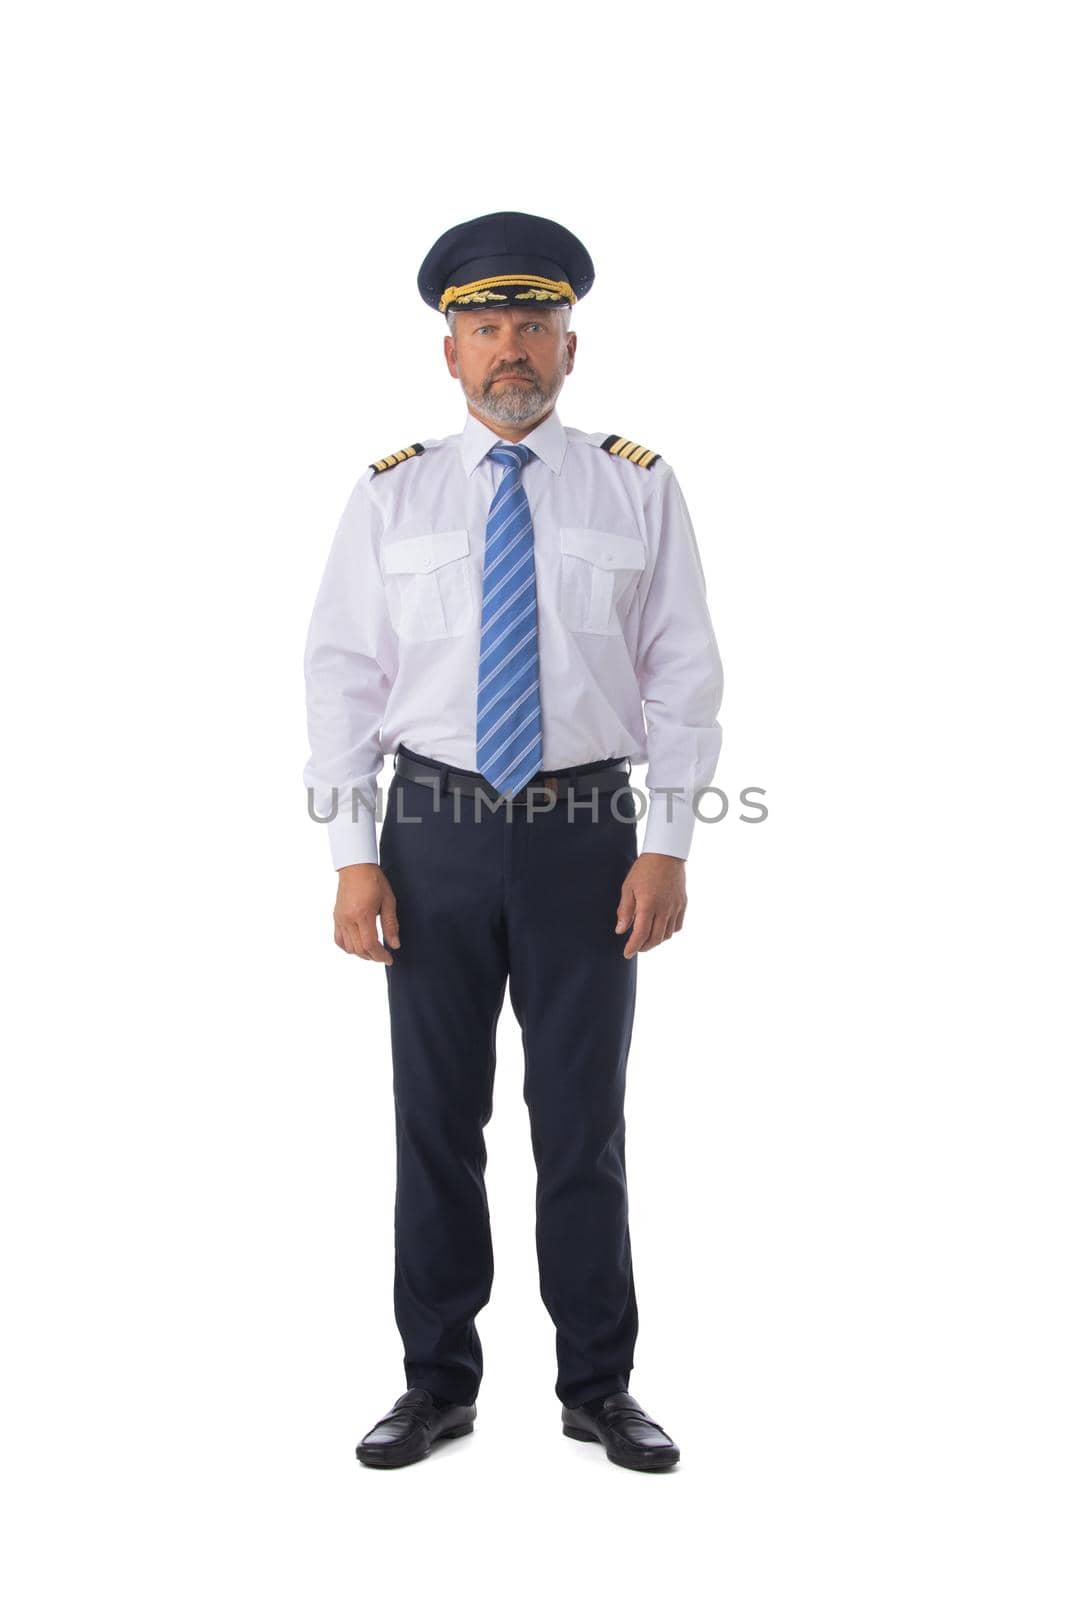 Airline pilot wearing the four bar Captains epaulettes, first pilot, aircraft commander, isolated on white background, full length portrait